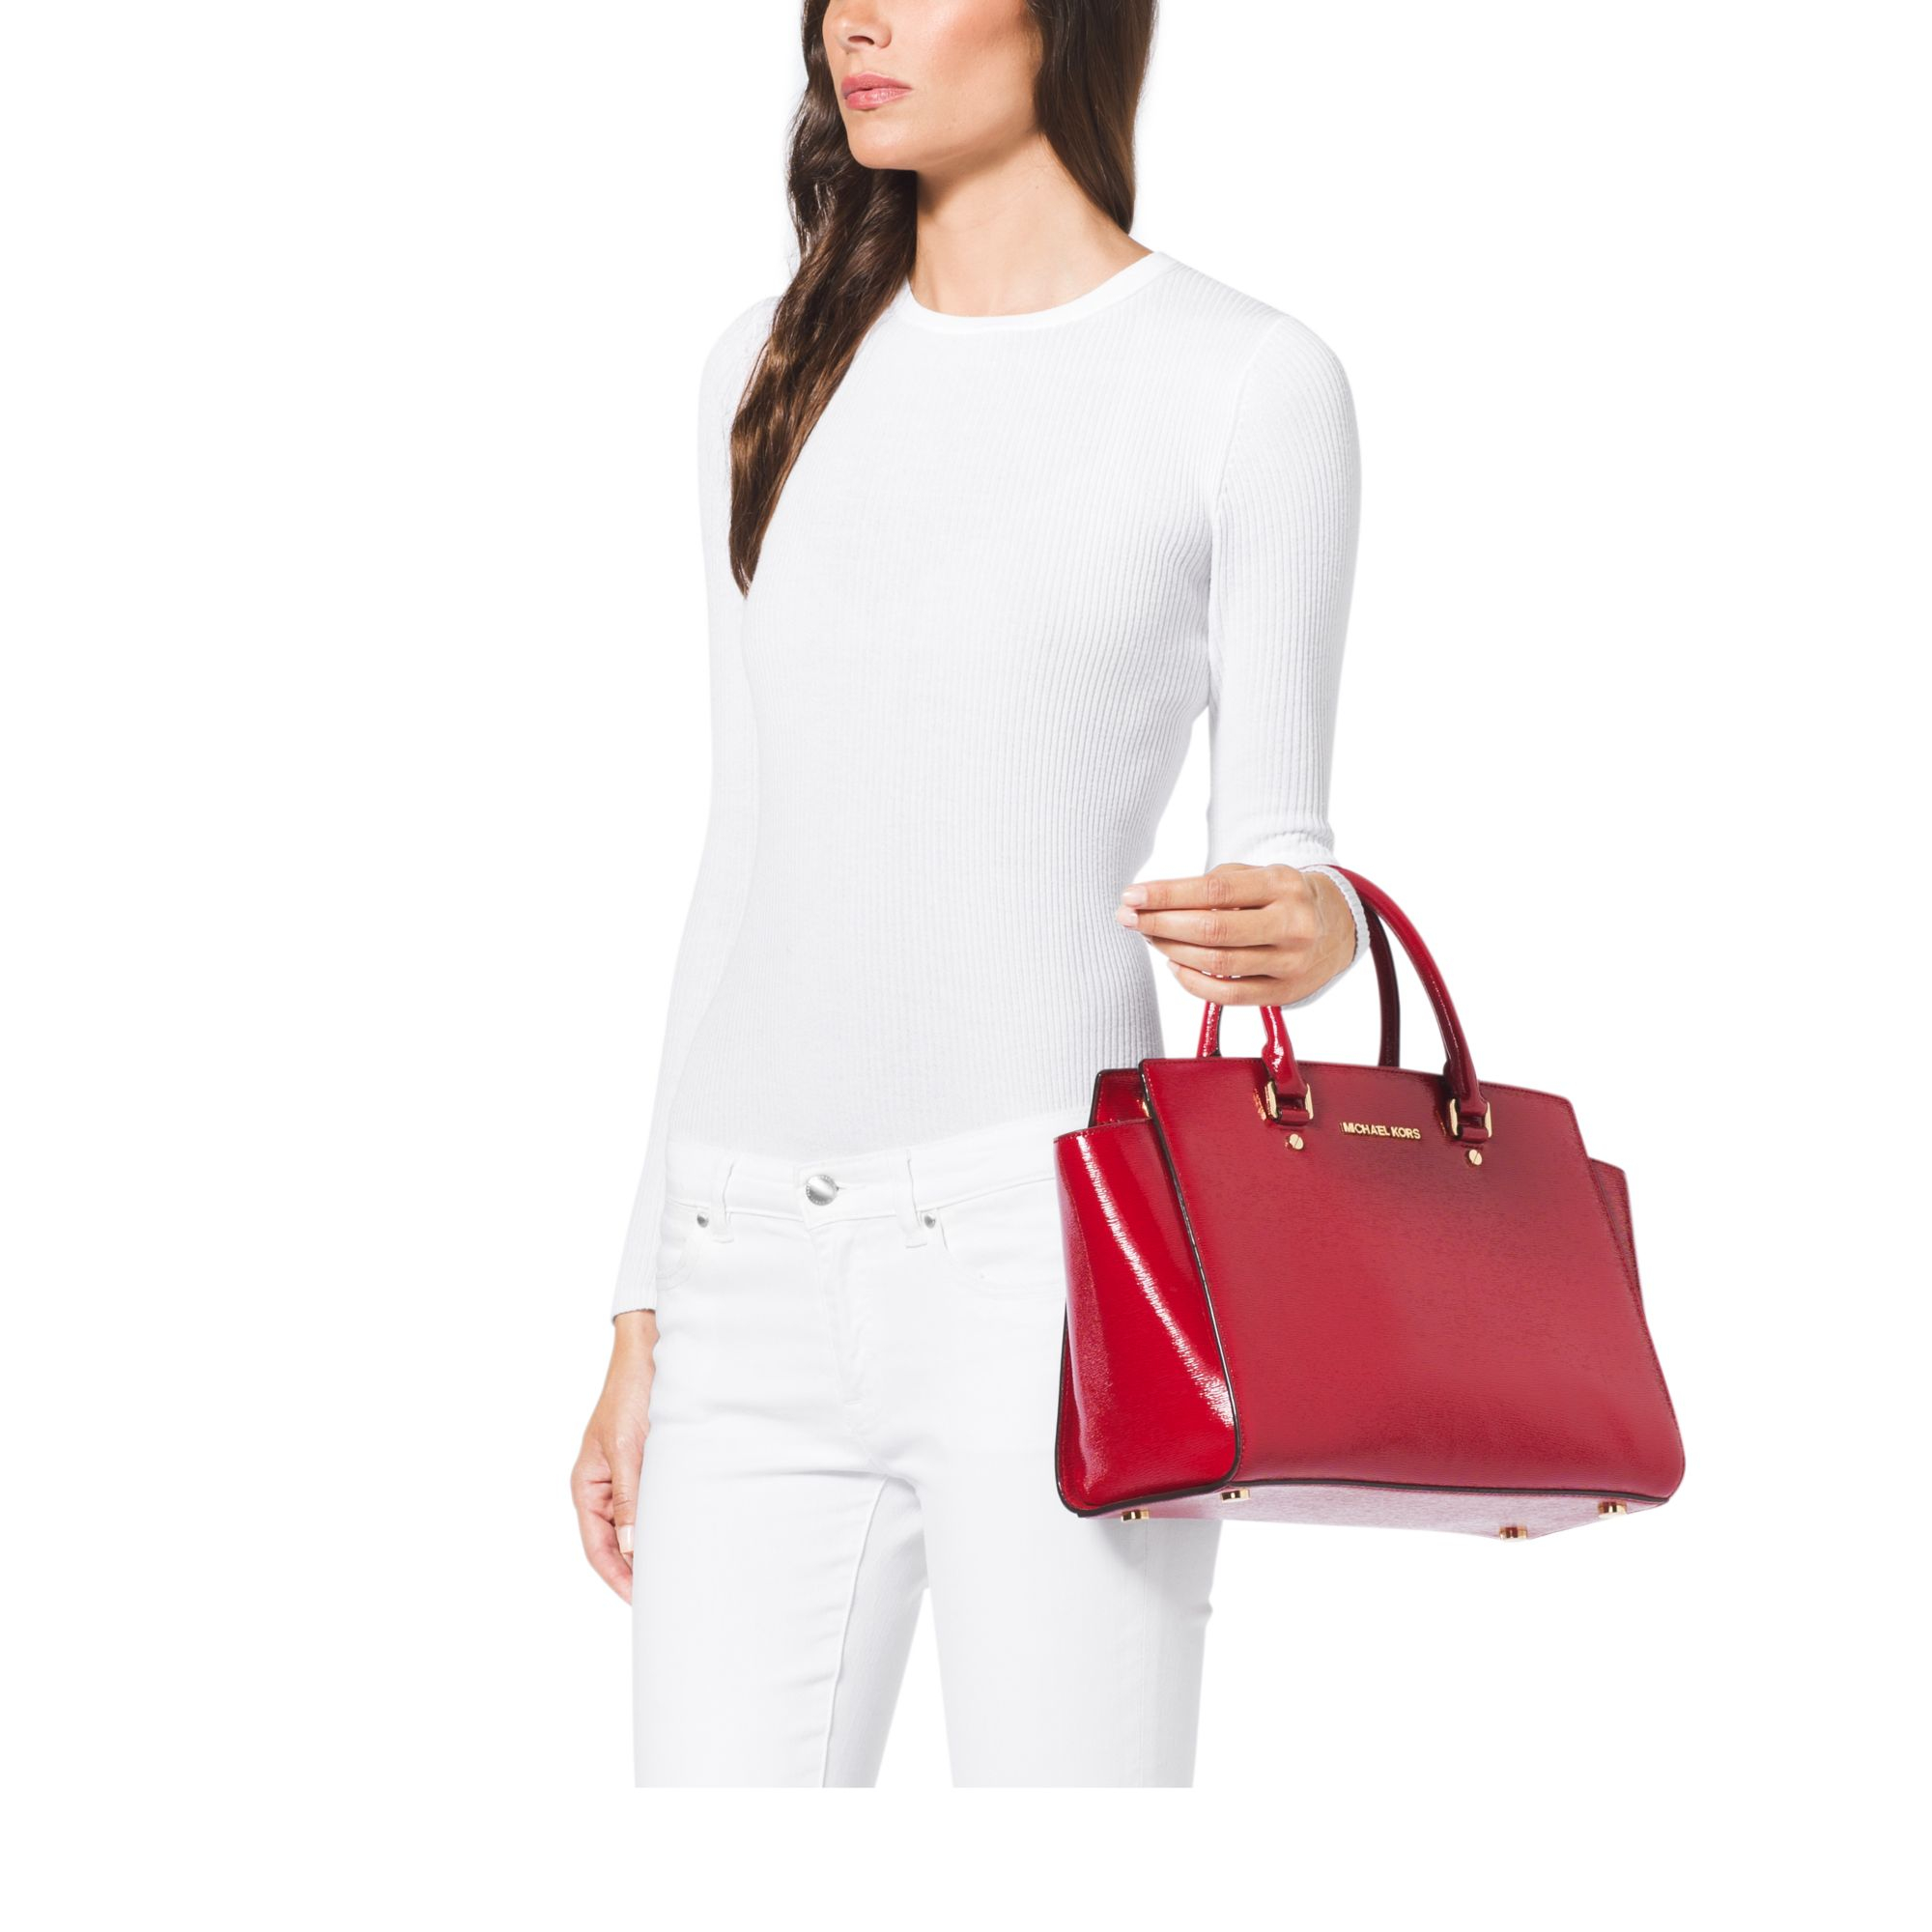 michael kors red patent leather purse